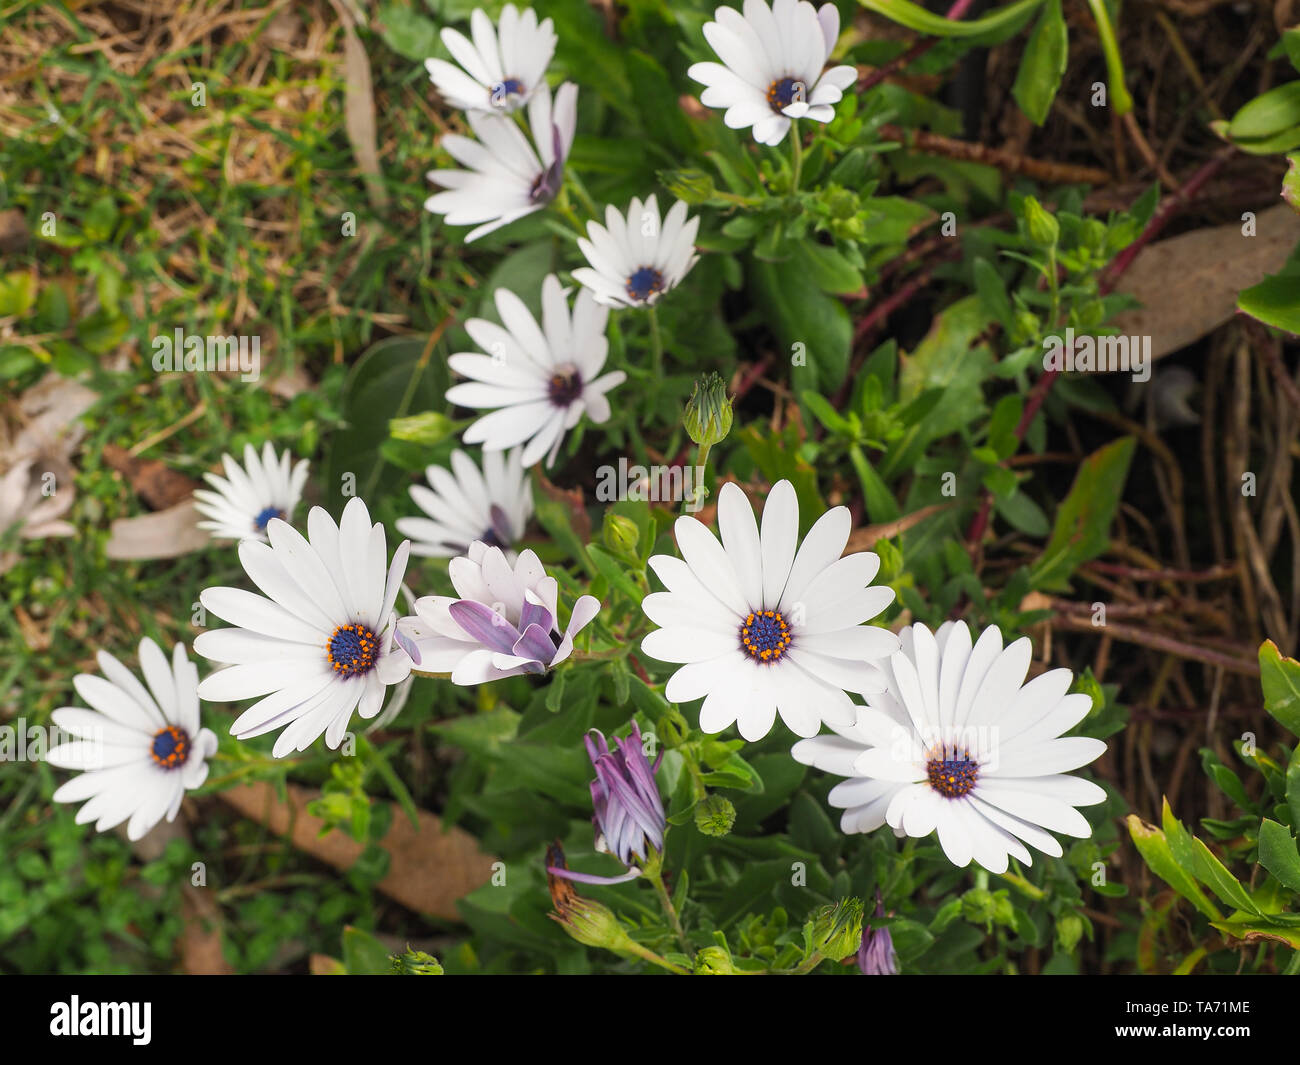 Osteospermum fruticosum, also called African daisy, daisy bush or African moon is a shrubby, semi succulent herbaceous flowering plant. White flowers. Stock Photo